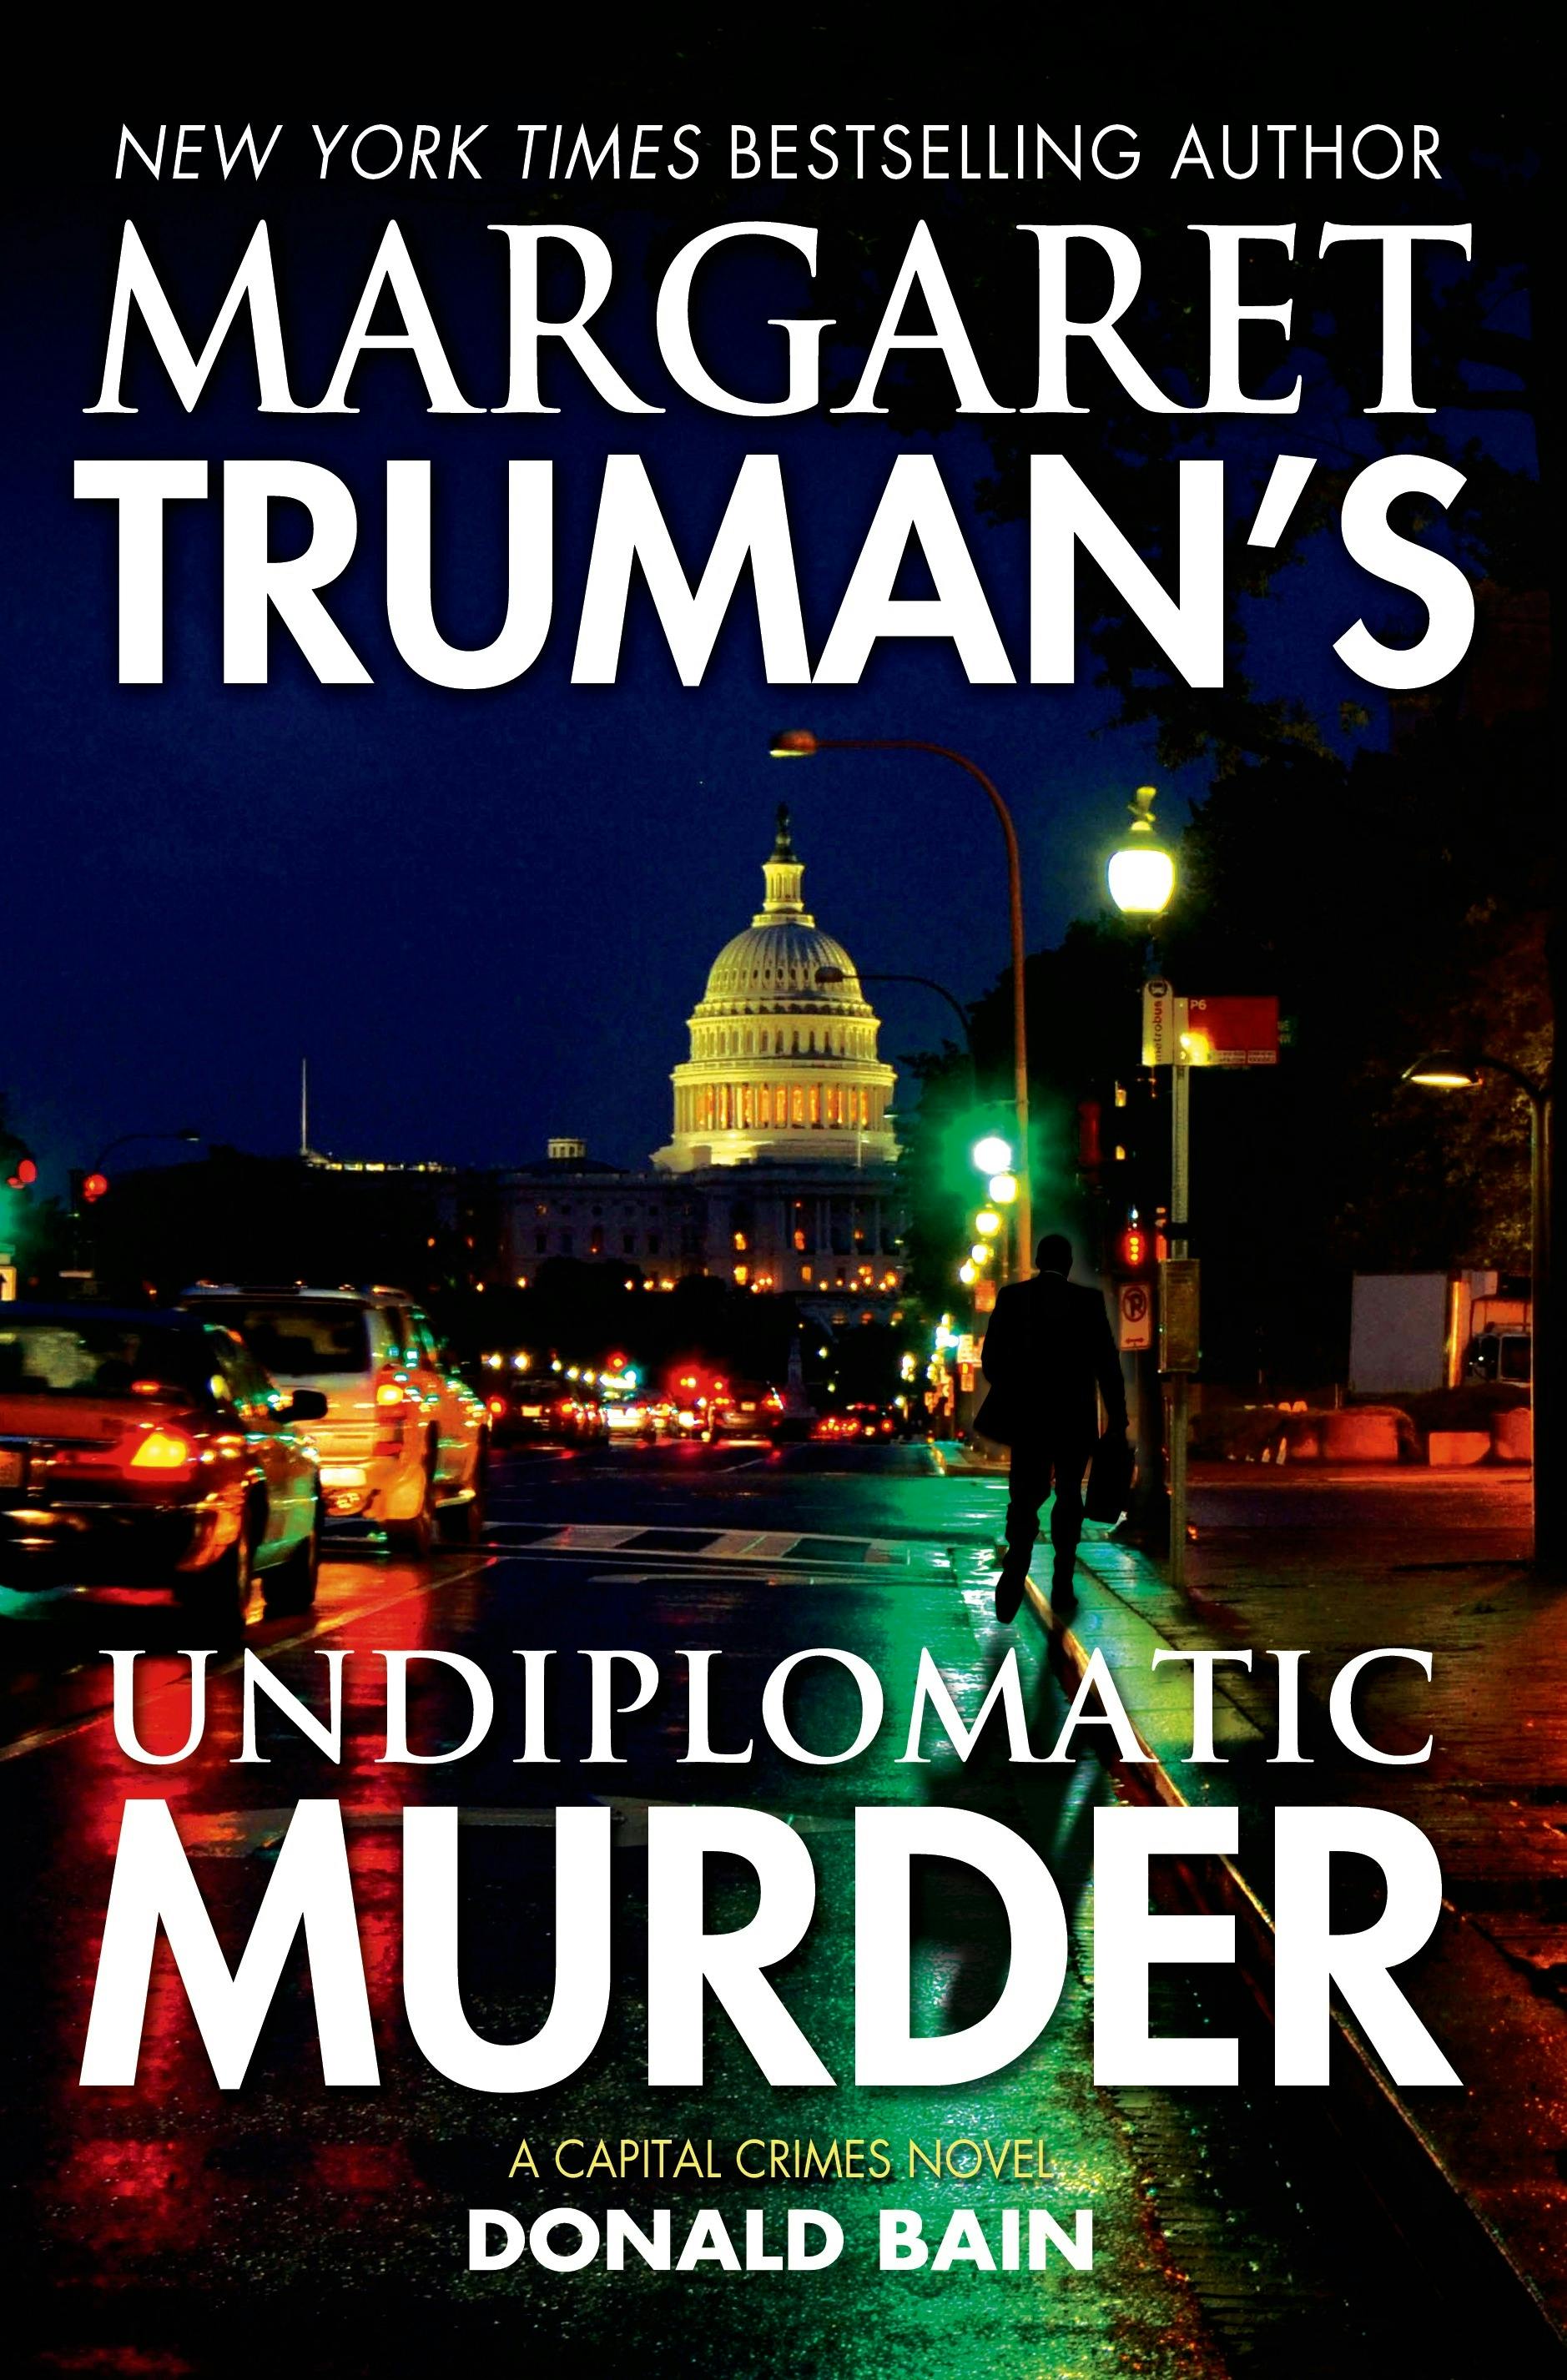 Cover for the book titled as: Margaret Truman's Undiplomatic Murder